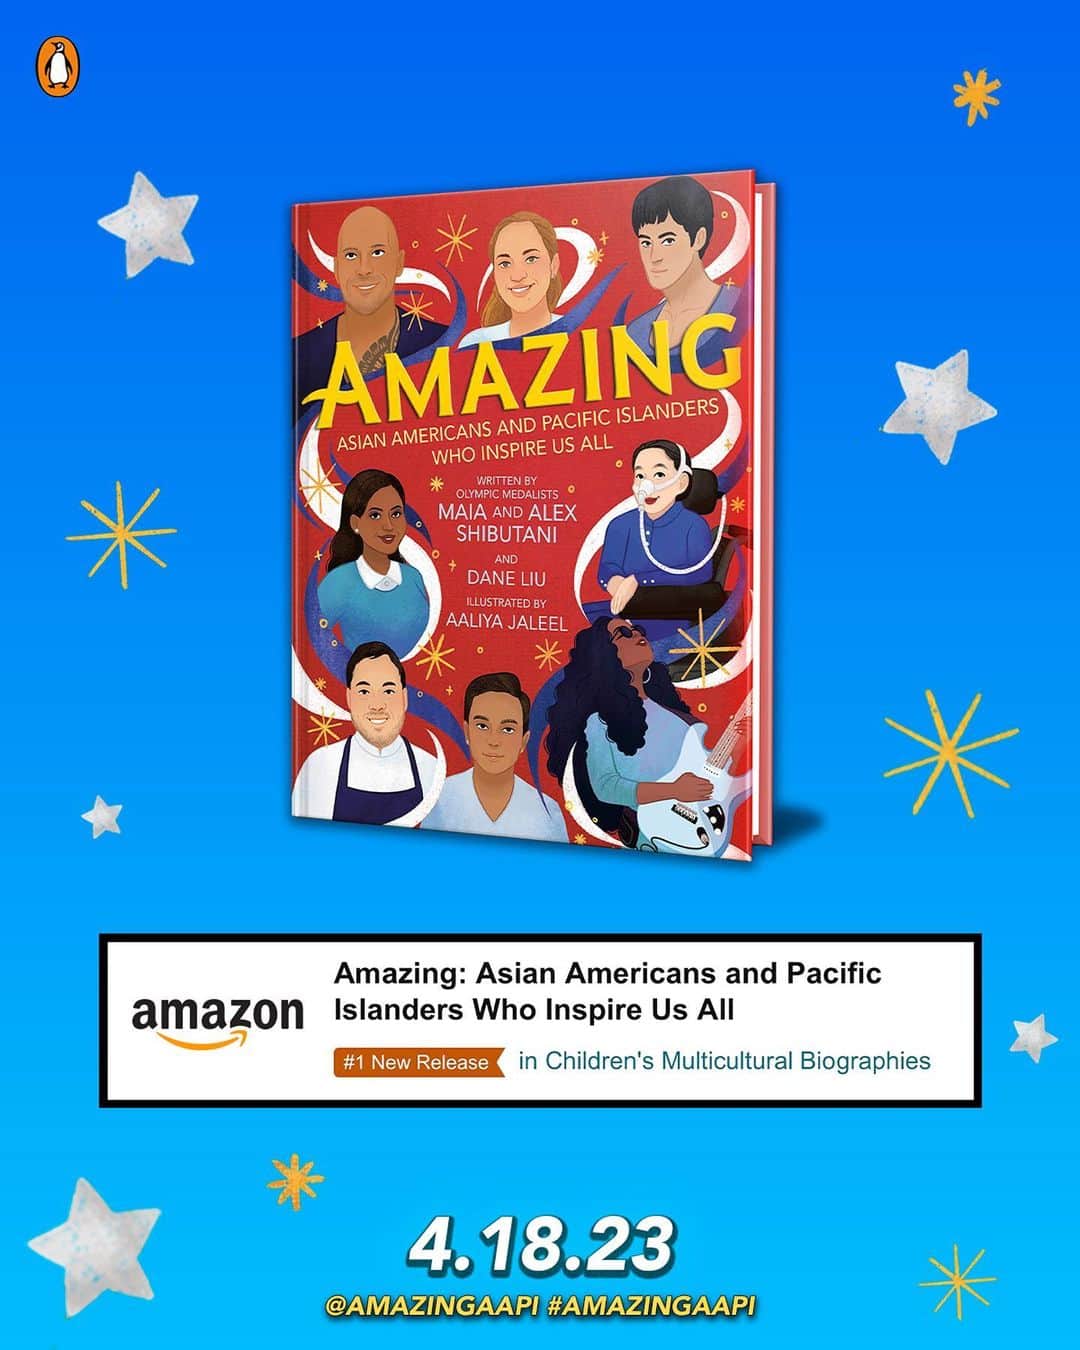 アレックス・シブタニさんのインスタグラム写真 - (アレックス・シブタニInstagram)「Here it is! The complete list of 36 trailblazers featured in Amazing: Asian Americans and Pacific Islanders Who Inspire Us All.  All of these figures are AMAZING. Both historic and contemporary, they have shaped life-altering policy, made indelible marks on pop culture, and achieved their greatest dreams—paving the way for future generations to make lasting change.  This book is being released in 5 days (4/18) and we can’t wait for everyone to read it. We truly believe that this is a book that people of all ages and from all backgrounds can enjoy and learn from.  A quick update on our book tour schedule (swipe for event details): Saturday, April 15th - LOS ANGELES - @bneventsgrove at @thegrovela @ 2pm [sign up via Eventbrite] Tuesday, April 18th - NEW YORK CITY - @yuandmebooks in Chinatown @ 5:30-7pm Wednesday, April 19th - WASHINGTON, D.C. - @busboysandpoets @ 6-8pm  Our mission is to get AMAZING into the hands of as many people as possible. We want to uplift, inspire, empower, and educate so that there can be greater empathy, understanding, and respect! Thank you to everyone who has preordered a copy (or several). Your support is deeply felt and appreciated. Together, we can make positive change for the next generation!  *Some good news to report: #AmazingAAPI is the #1 New Release on Amazon in the Children’s Multicultural Biographies category. We’re in a hotly contested battle for the top spot with a book about Oprah (yes, THE Oprah), so help us out!  @amazingaapi #AmazingAAPI #aapi #aapihistory #aapibooks #authorsofinstagram #newbook #booktour #childrensliterature #kidlit #representationmatters #shibsibs」4月14日 8時26分 - alexshibutani